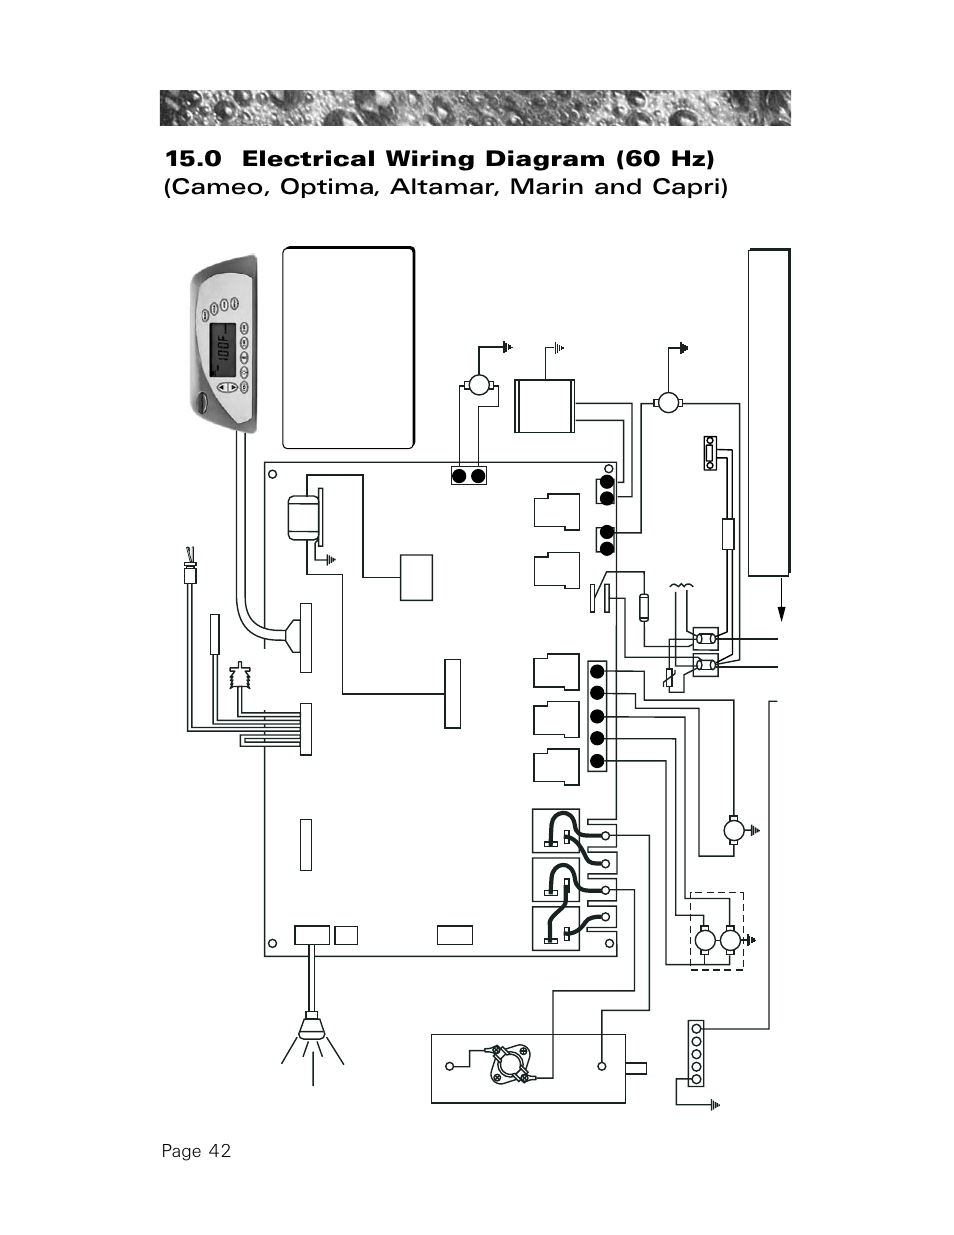 0 Electrical Wiring Diagram  60 Hz   Page 42